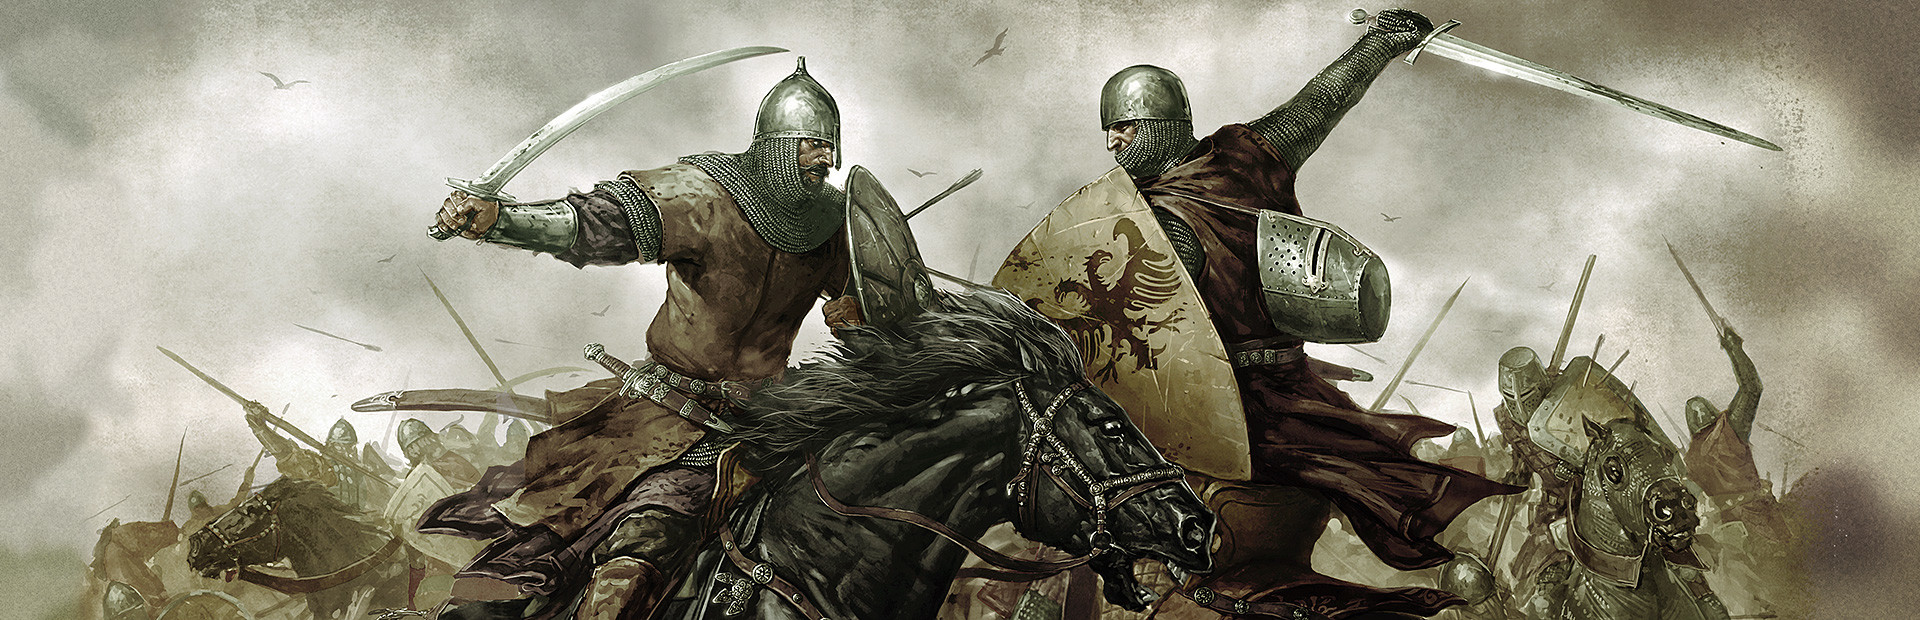 Mount & Blade: Warband cover image